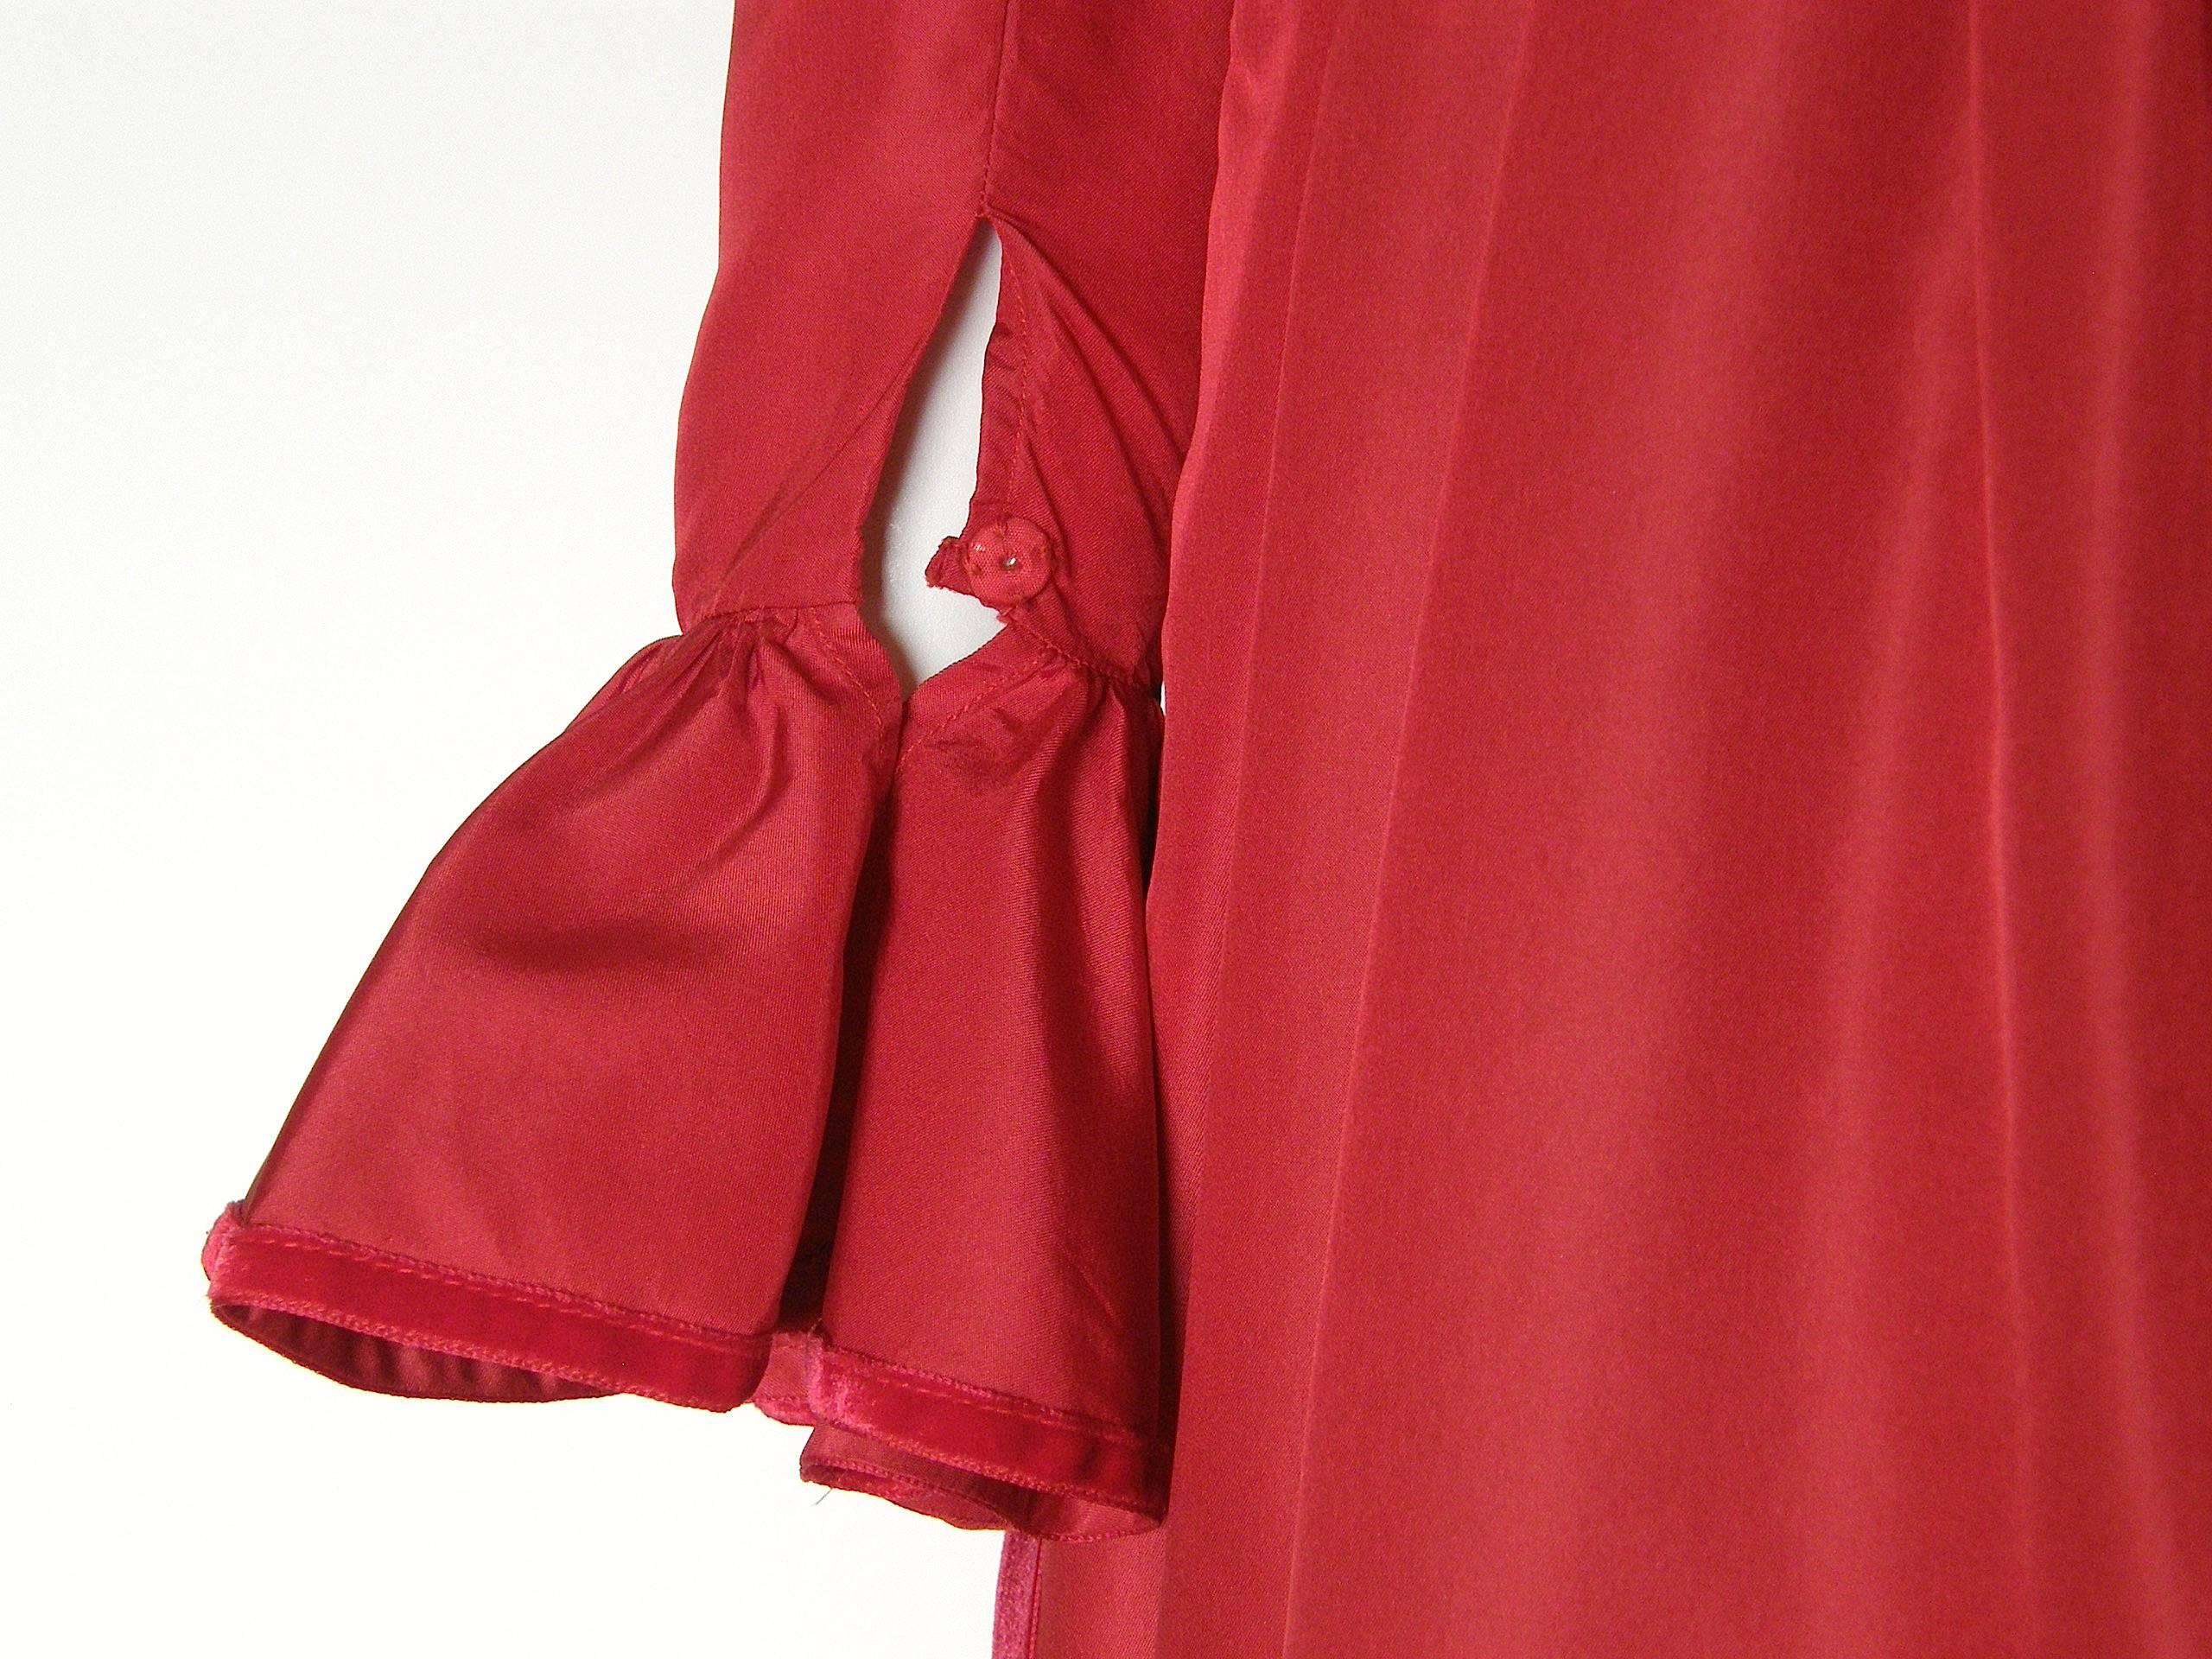 Oscar de la Renta Red Silk Taffeta Gown with Tiered Skirt and Ruffled Cuffs For Sale 2